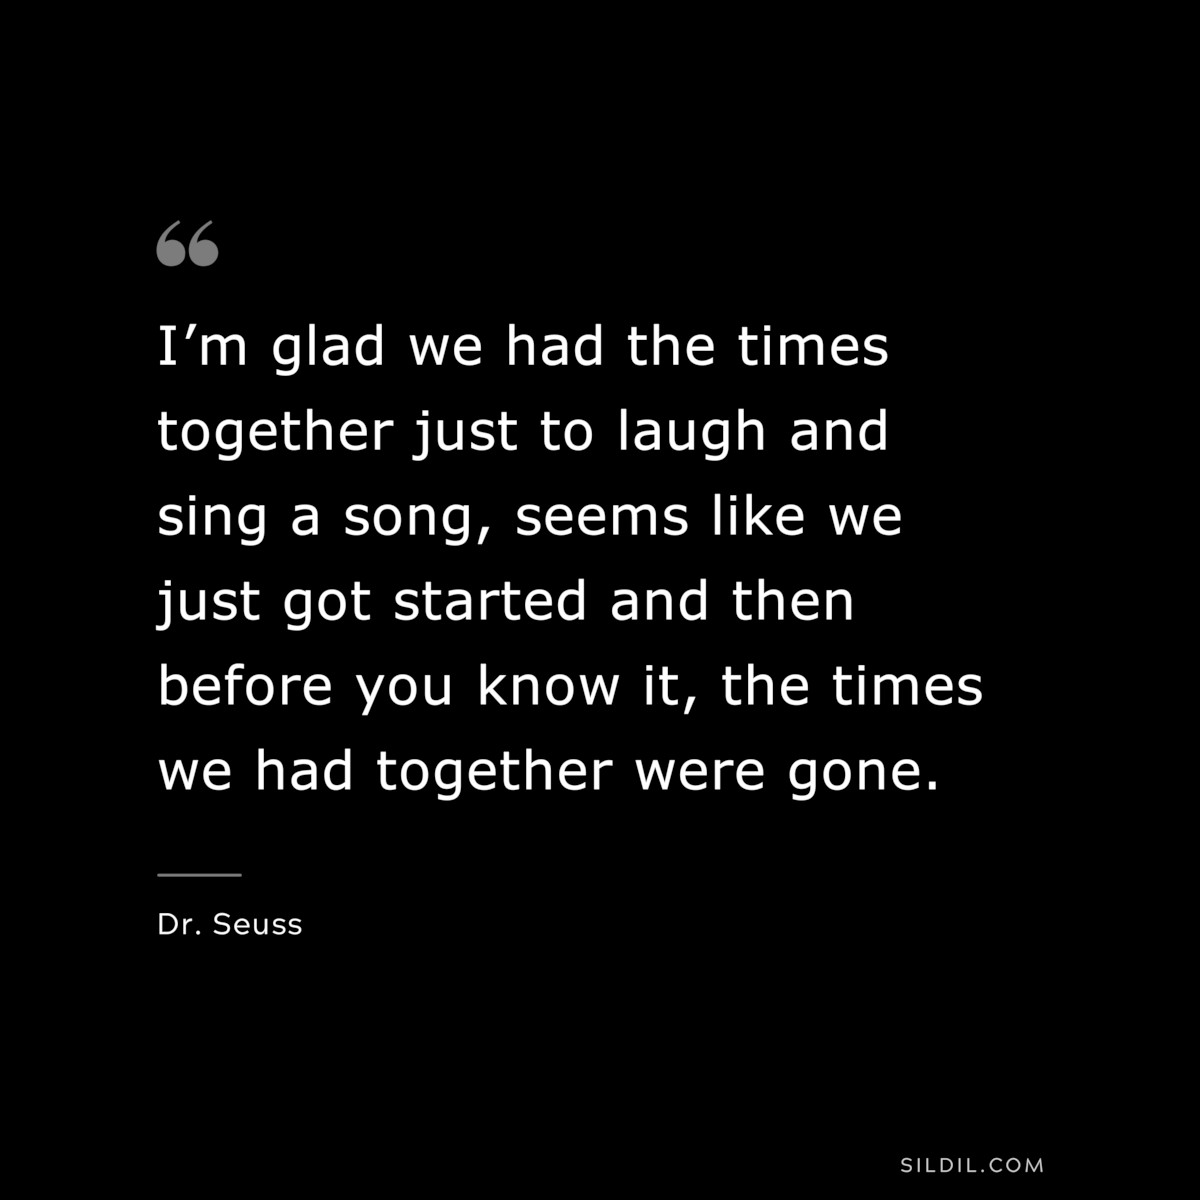 I’m glad we had the times together just to laugh and sing a song, seems like we just got started and then before you know it, the times we had together were gone. ― Dr. Seuss